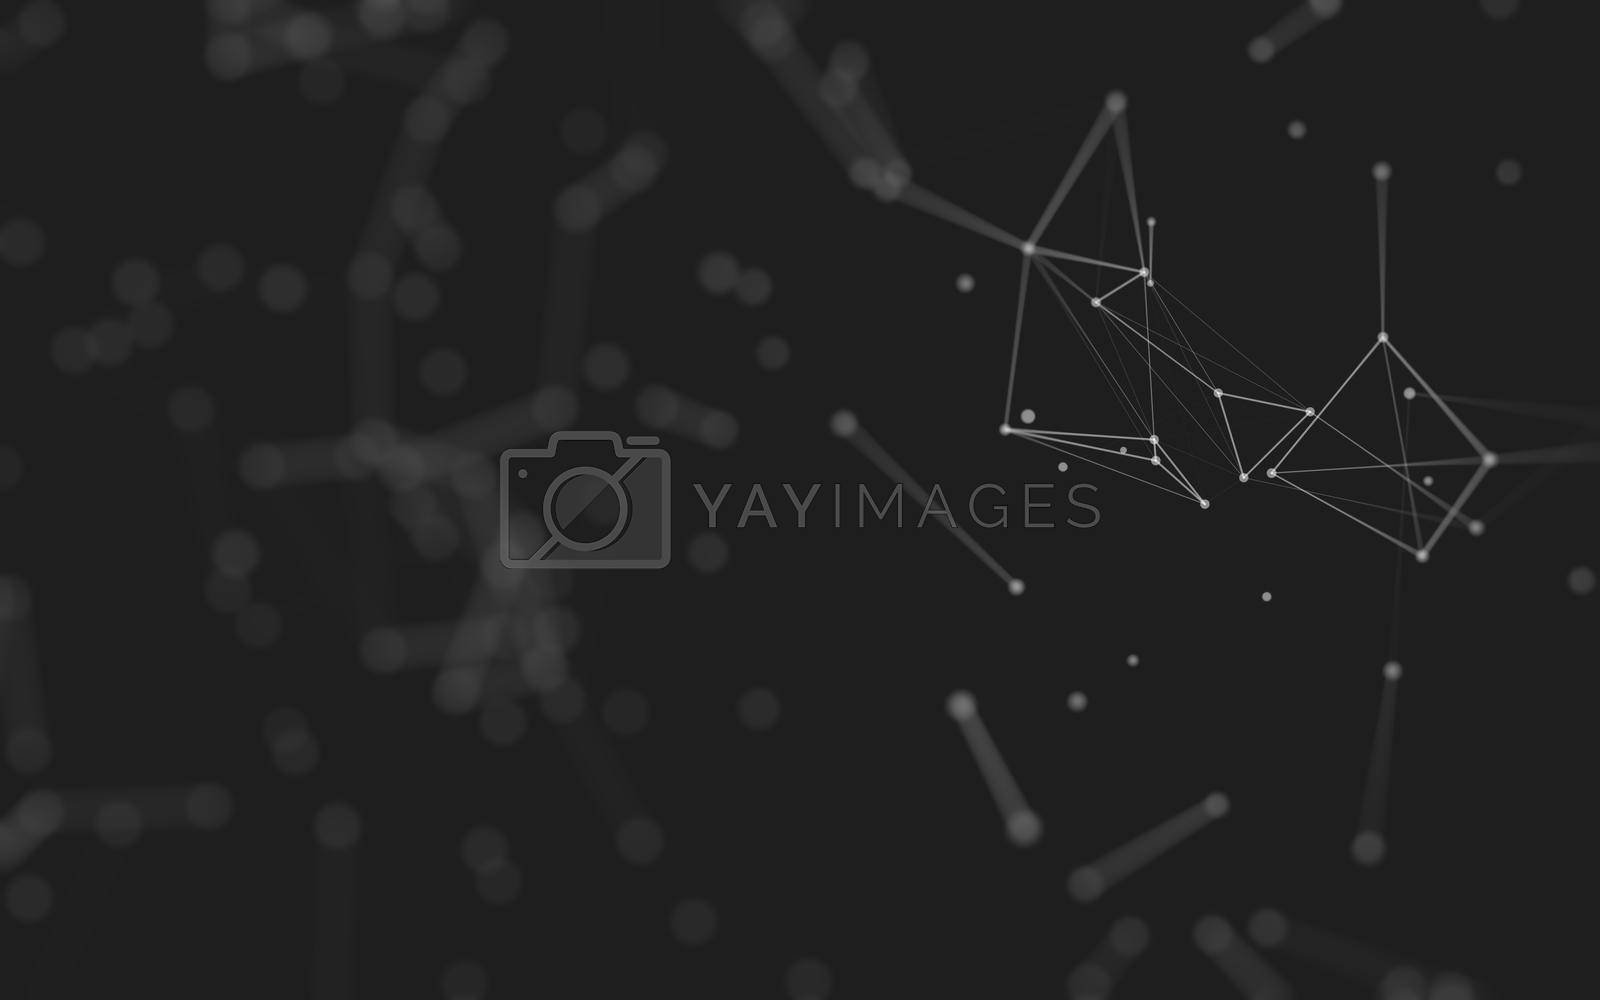 Royalty free image of Abstract background. Molecules technology with polygonal shapes, connecting dots and lines. Connection structure. Big data visualization.  by teerawit